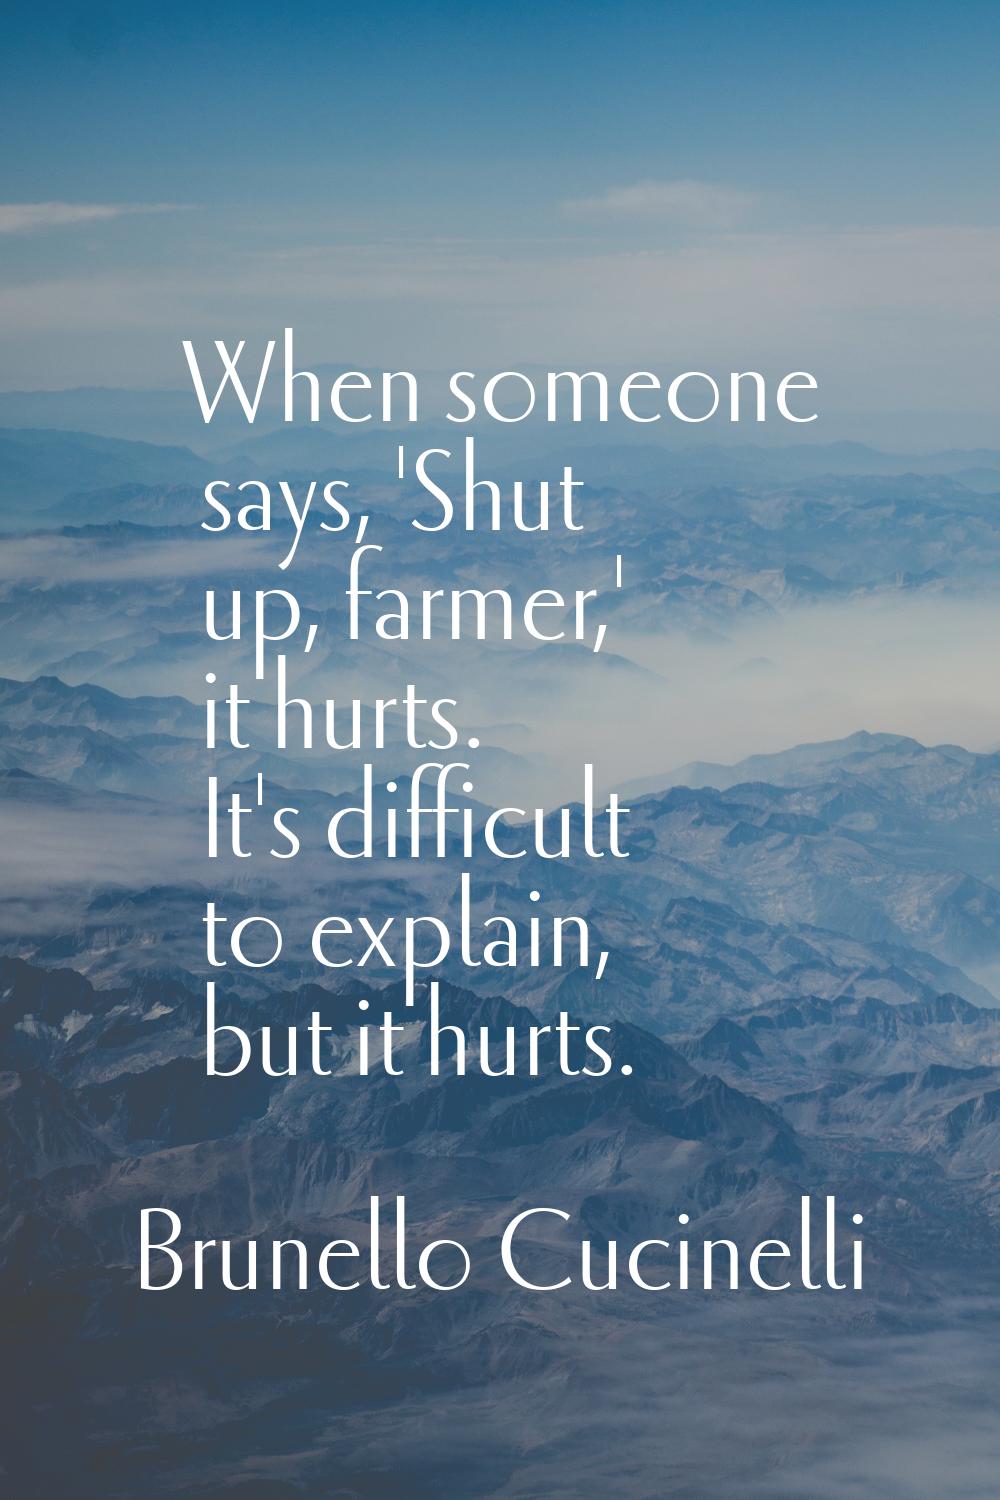 When someone says, 'Shut up, farmer,' it hurts. It's difficult to explain, but it hurts.